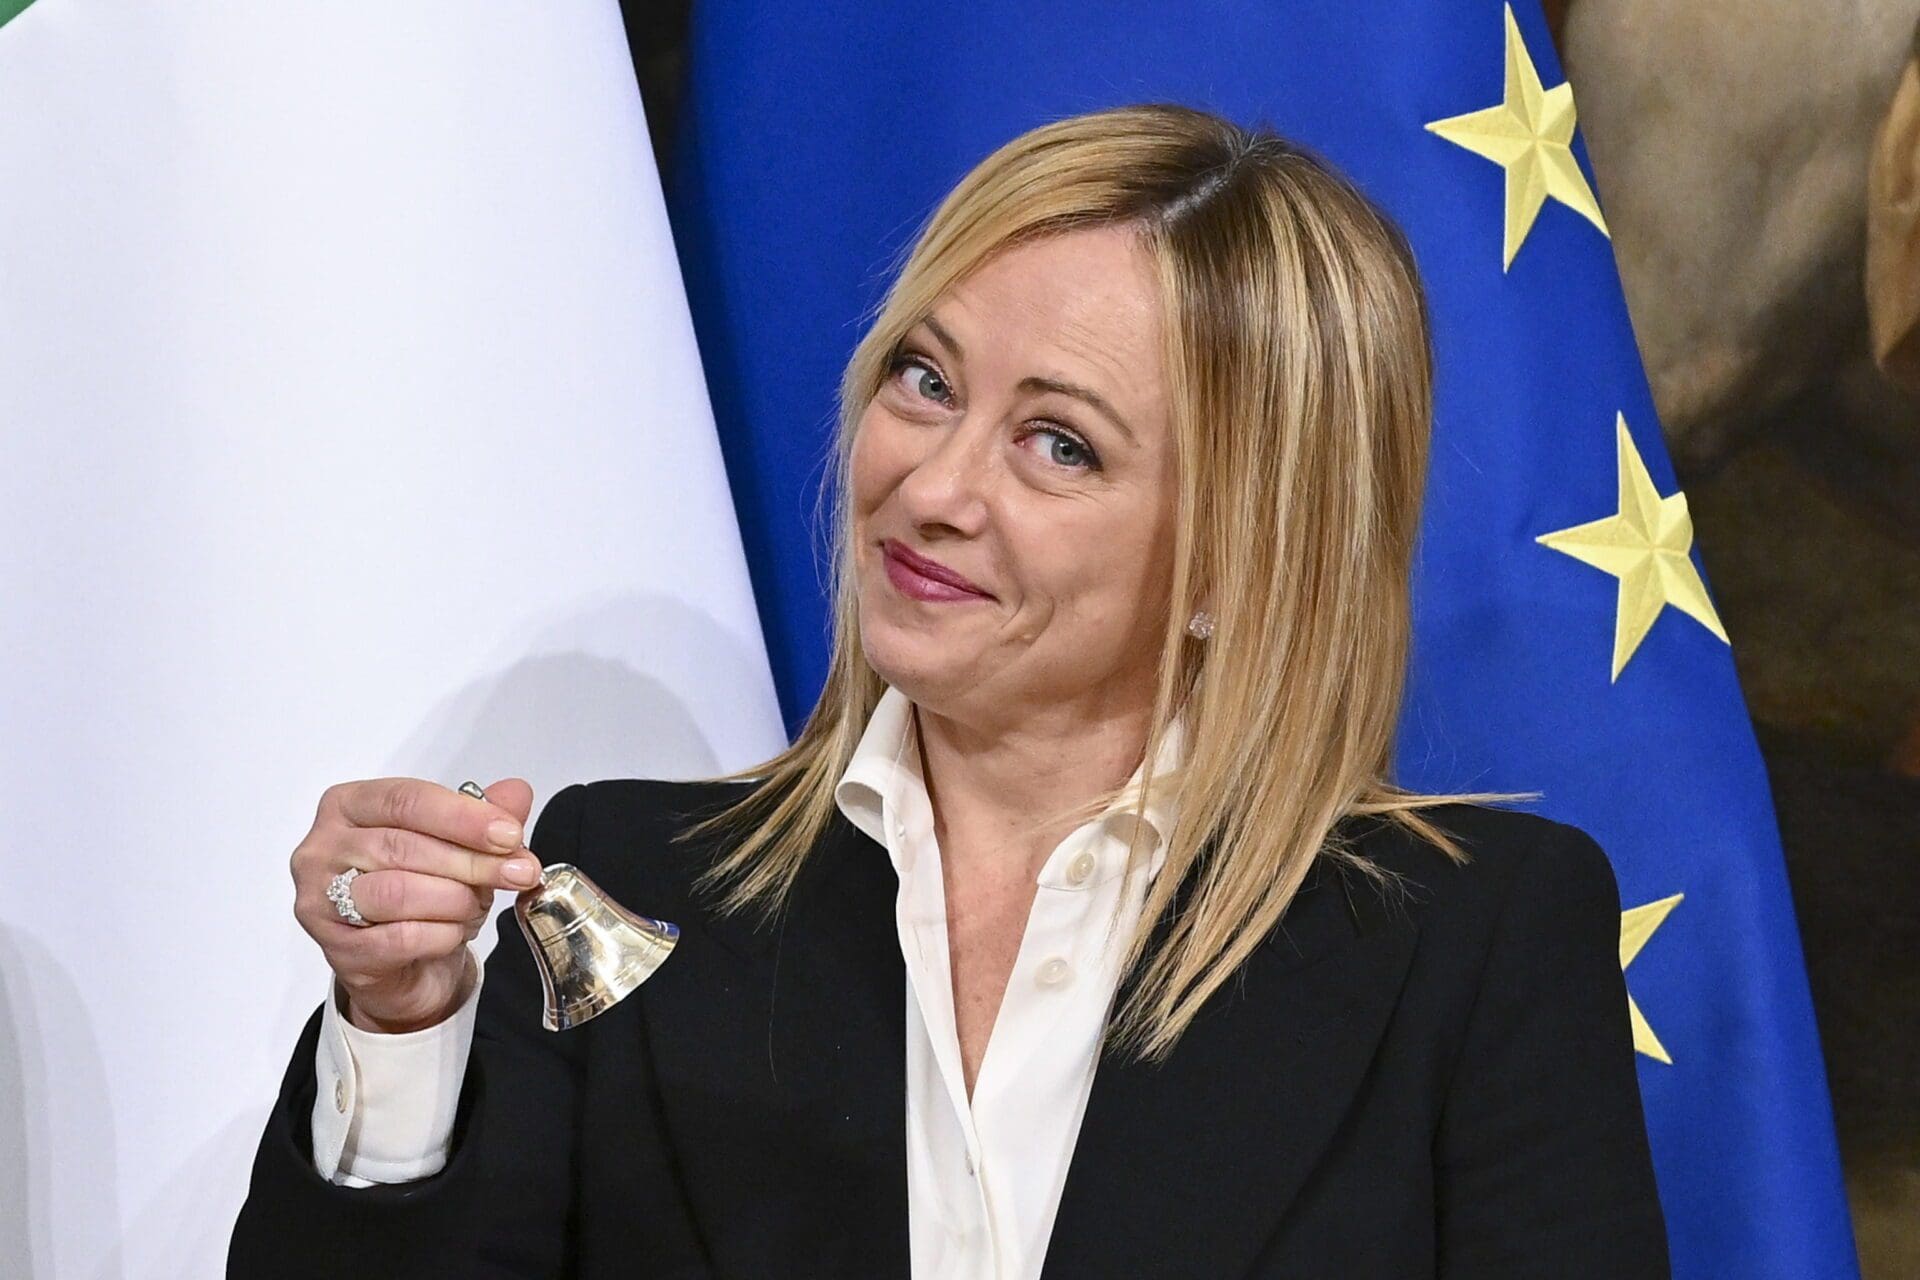 A Woman, a Mother and Christian' — Who Is Giorgia Meloni, Italy's First Female Prime Minister? | Hungarian Conservative